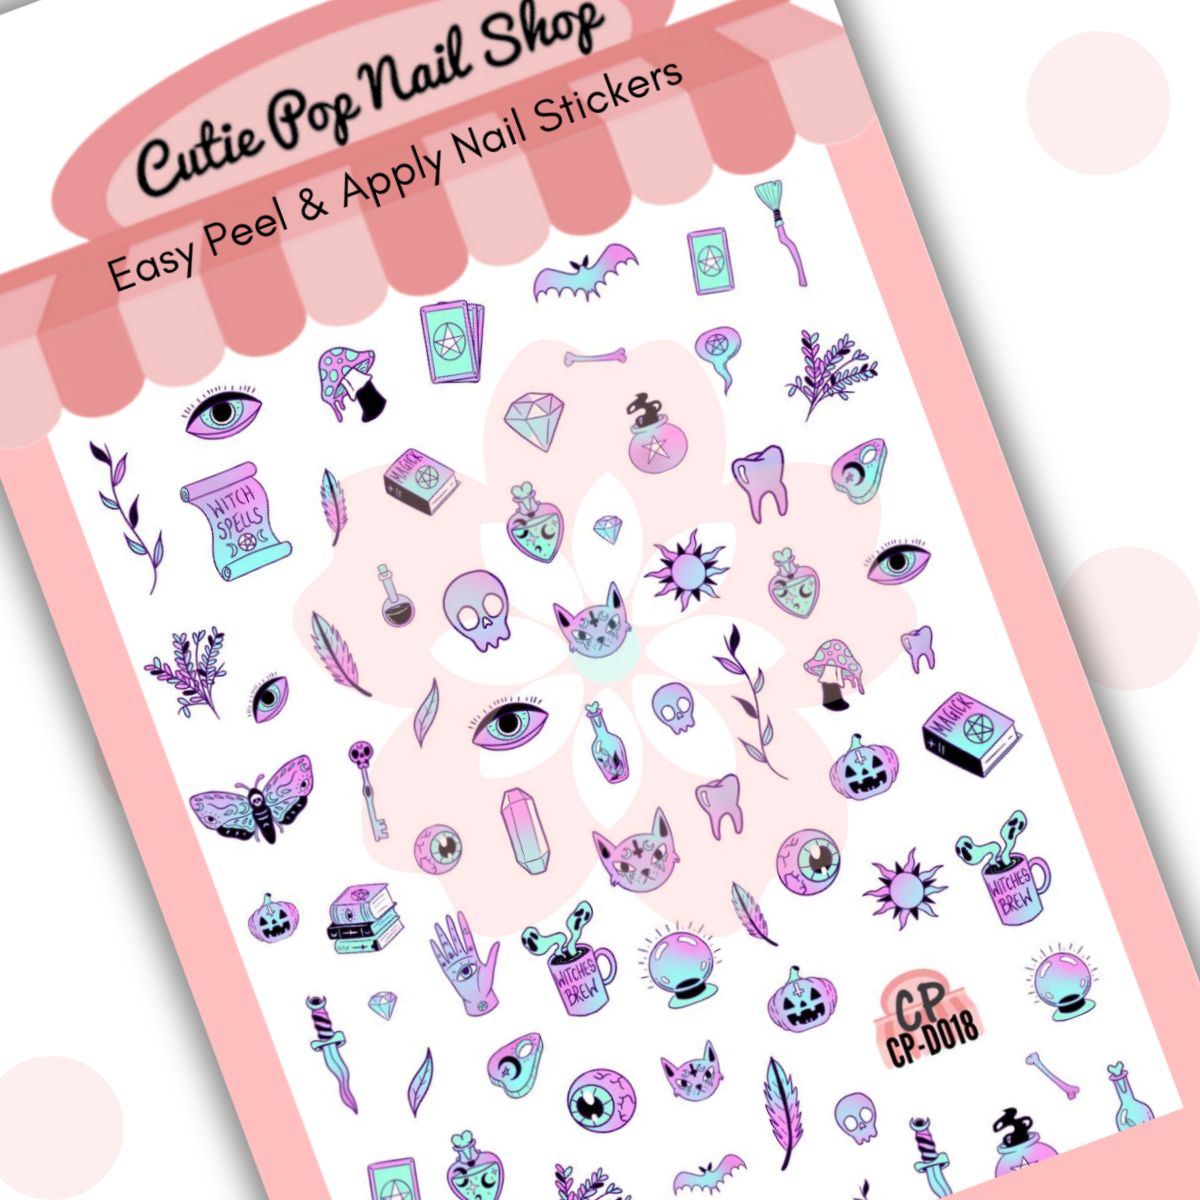 Cutie Pop Nail Shop’s Witchy Vibes nail decals. These neon purple-and-turquoise nail decal designs include leaves, eyes, toadstools, books of spells, bats, brushes, bones, diamonds, witch spell scrolls, vials of potions, bottles of potions, keys with skulls, pumpkins, hands with eyes on their palms, individual teeth, skulls, twisted daggers, crystal balls, angry, menacing cat faces, sun, eyeballs, cups of witch’s brew with ghouls emerging, gemstones, and broomsticks.